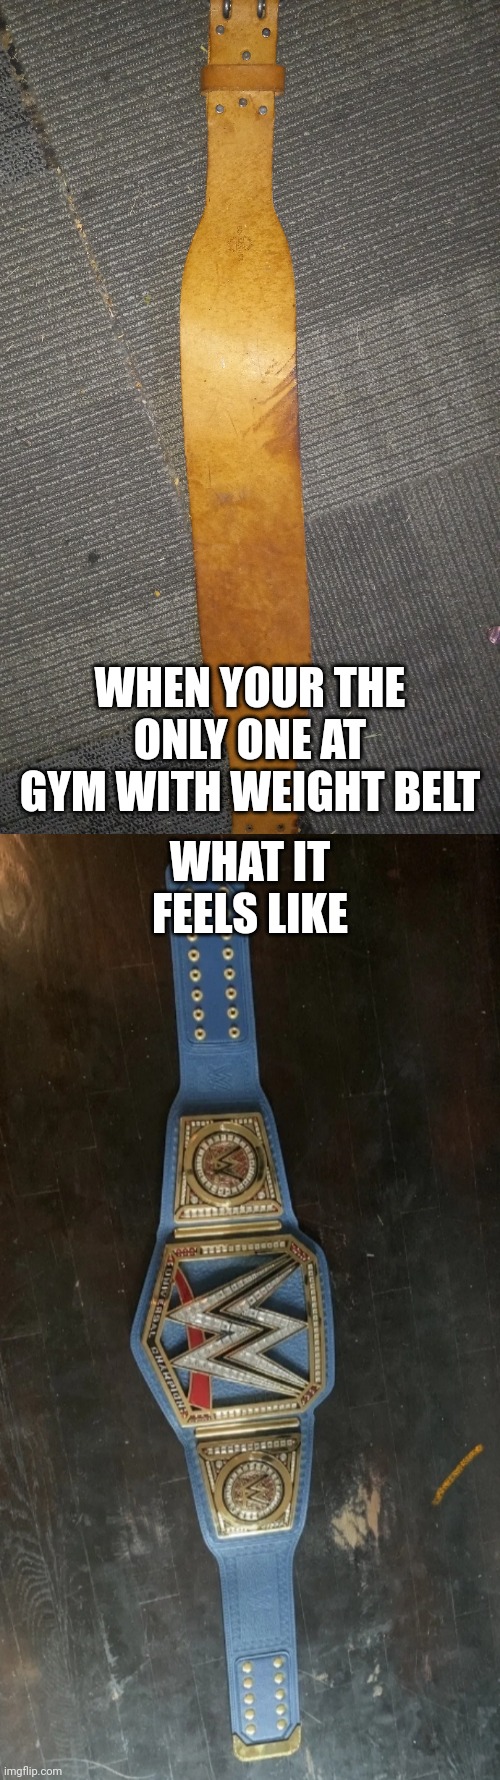 Sports training life | WHEN YOUR THE ONLY ONE AT GYM WITH WEIGHT BELT; WHAT IT FEELS LIKE | image tagged in gym memes,fitness,real life | made w/ Imgflip meme maker